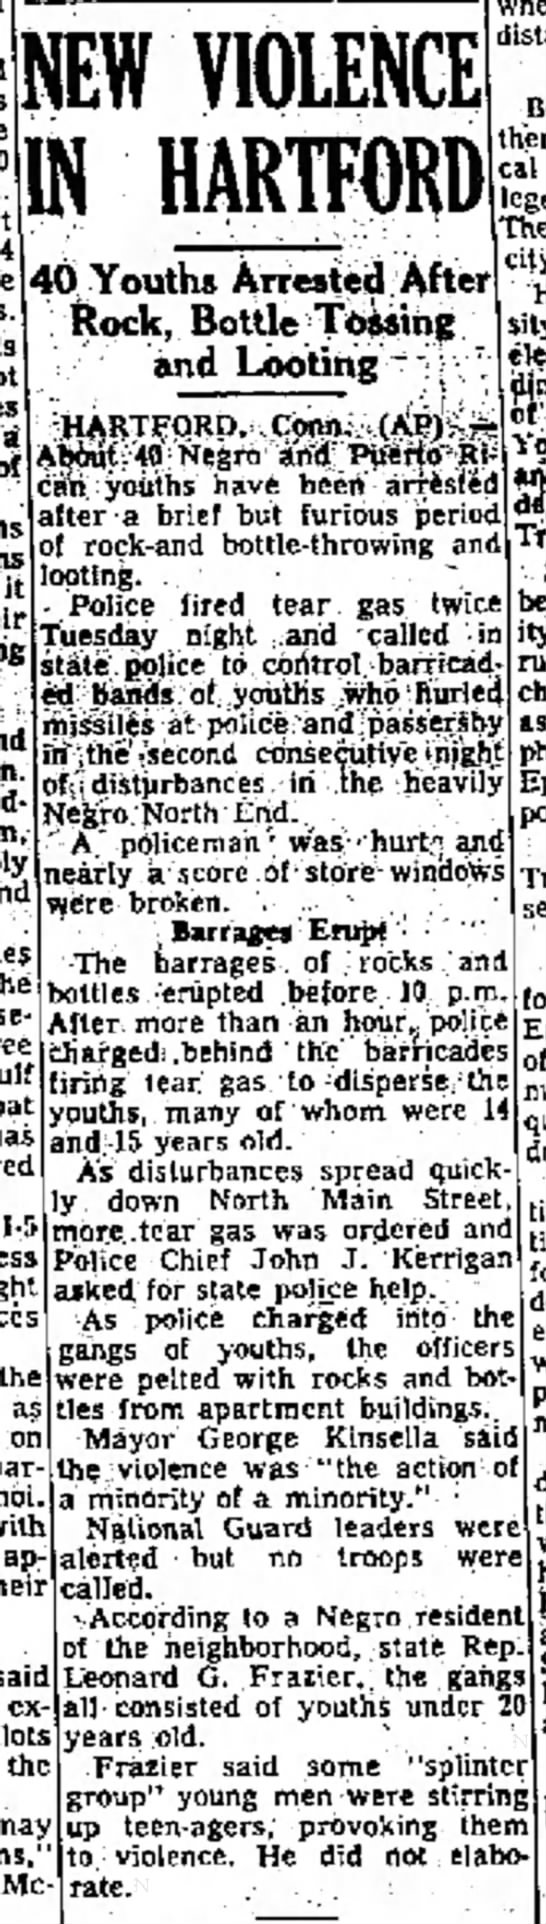 Clipped from The Bridgeport Post, 20 Sep 1967, Wed, Page 1